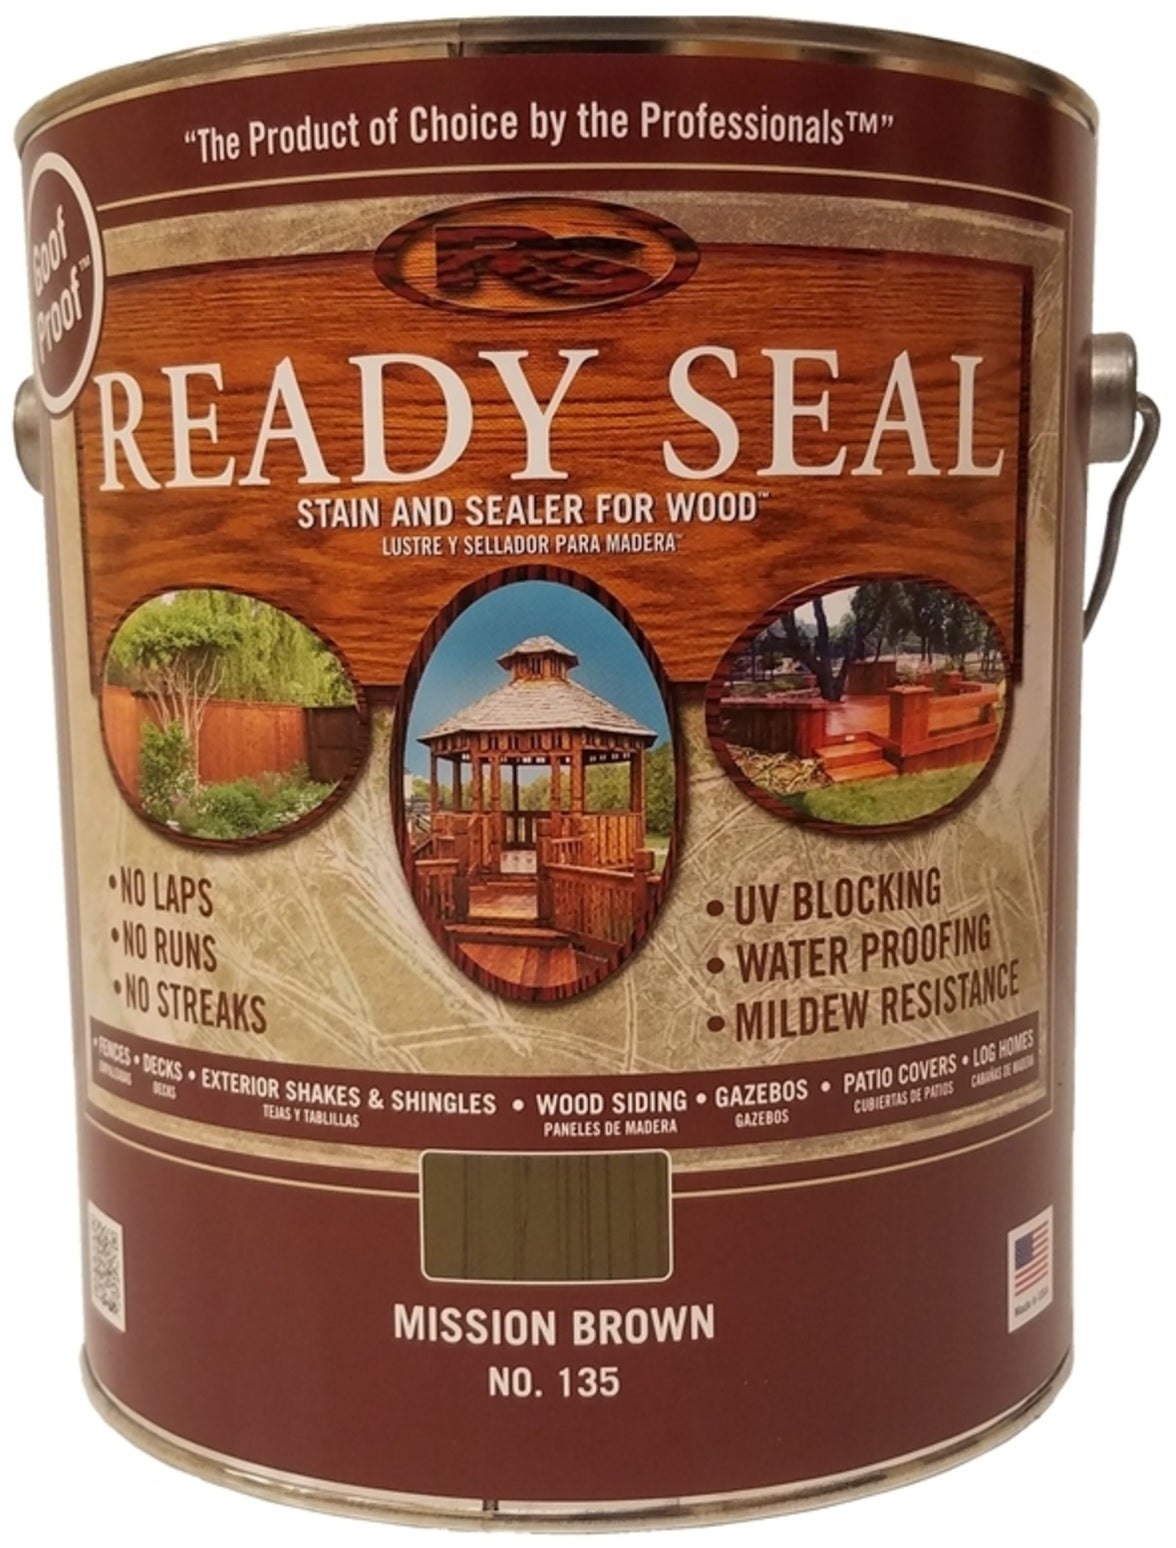 Ready Seal 135 Wood Stain & Sealer, 1 Gallon